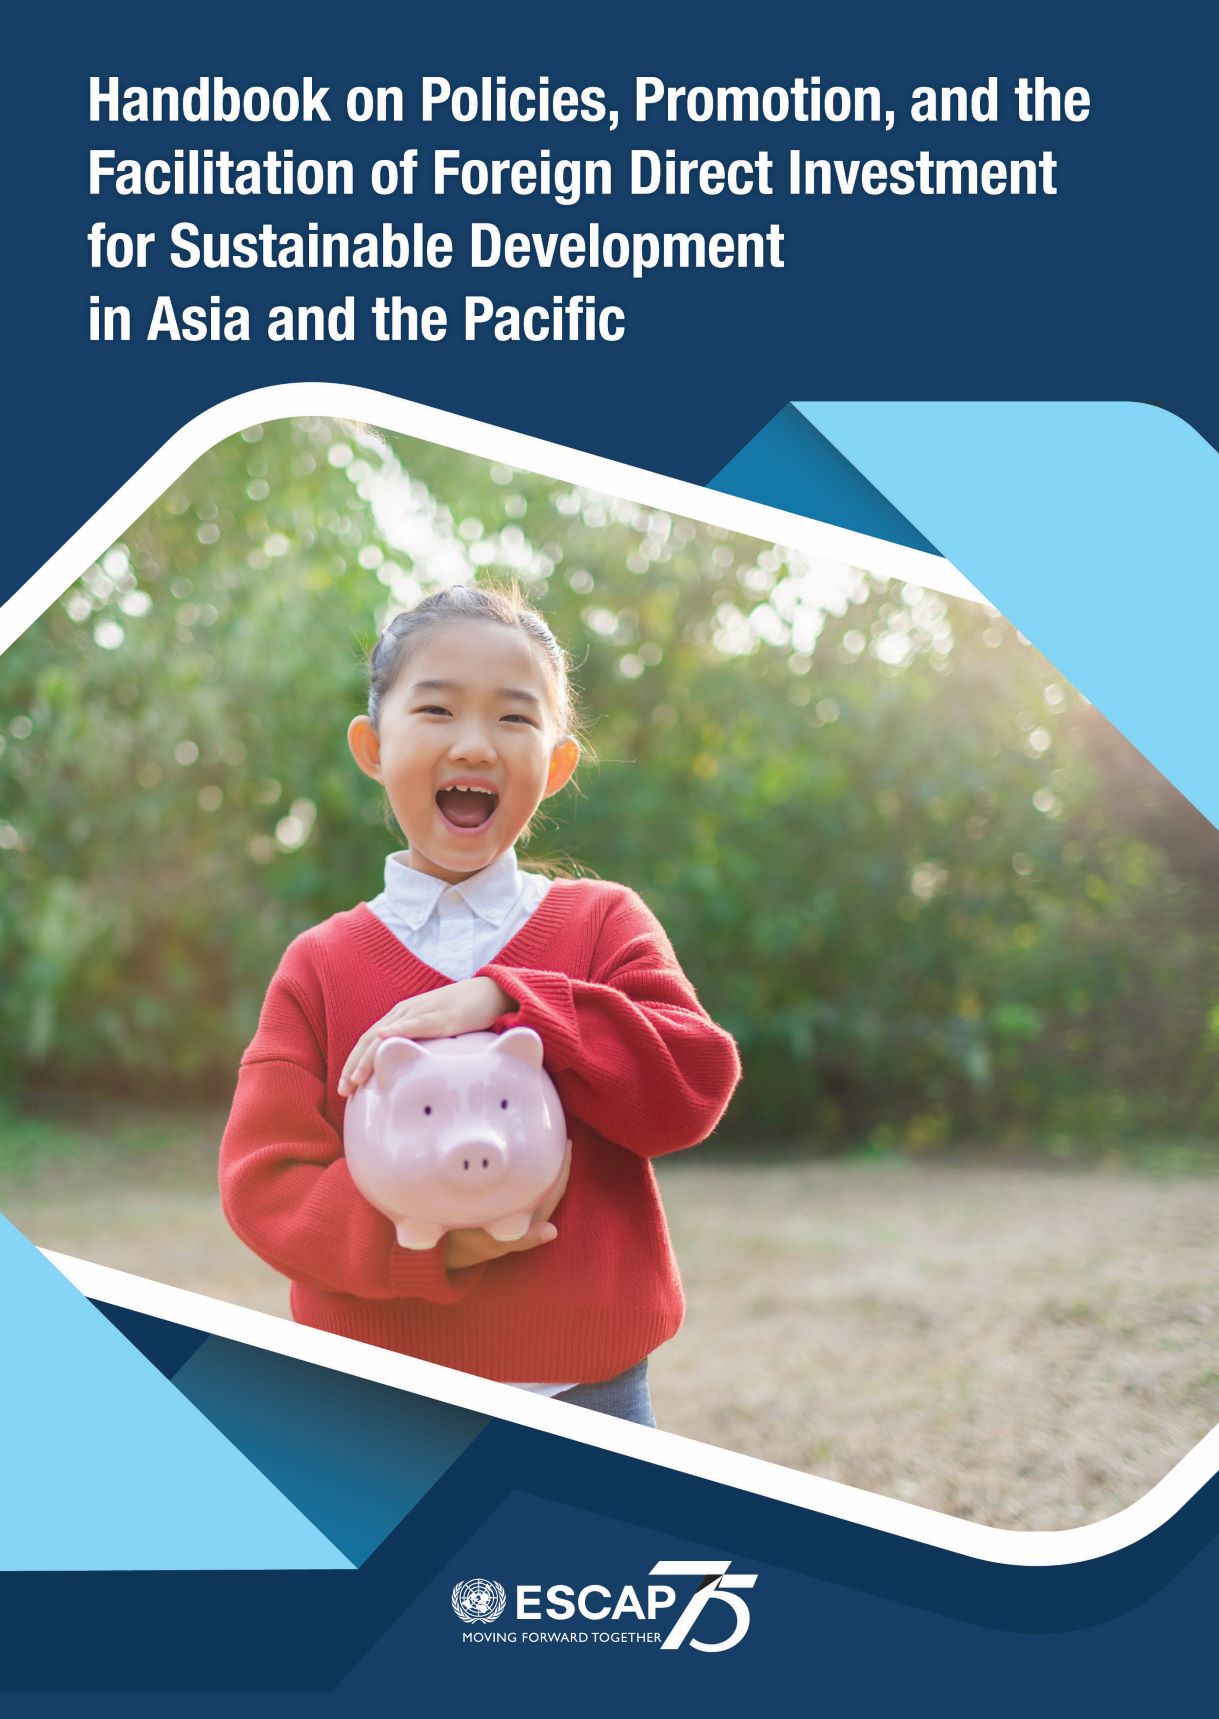 Publication: Handbook on Policies, Promotion, and the Facilitation of Foreign Direct Investment for Sustainable Development in Asia and the Pacific